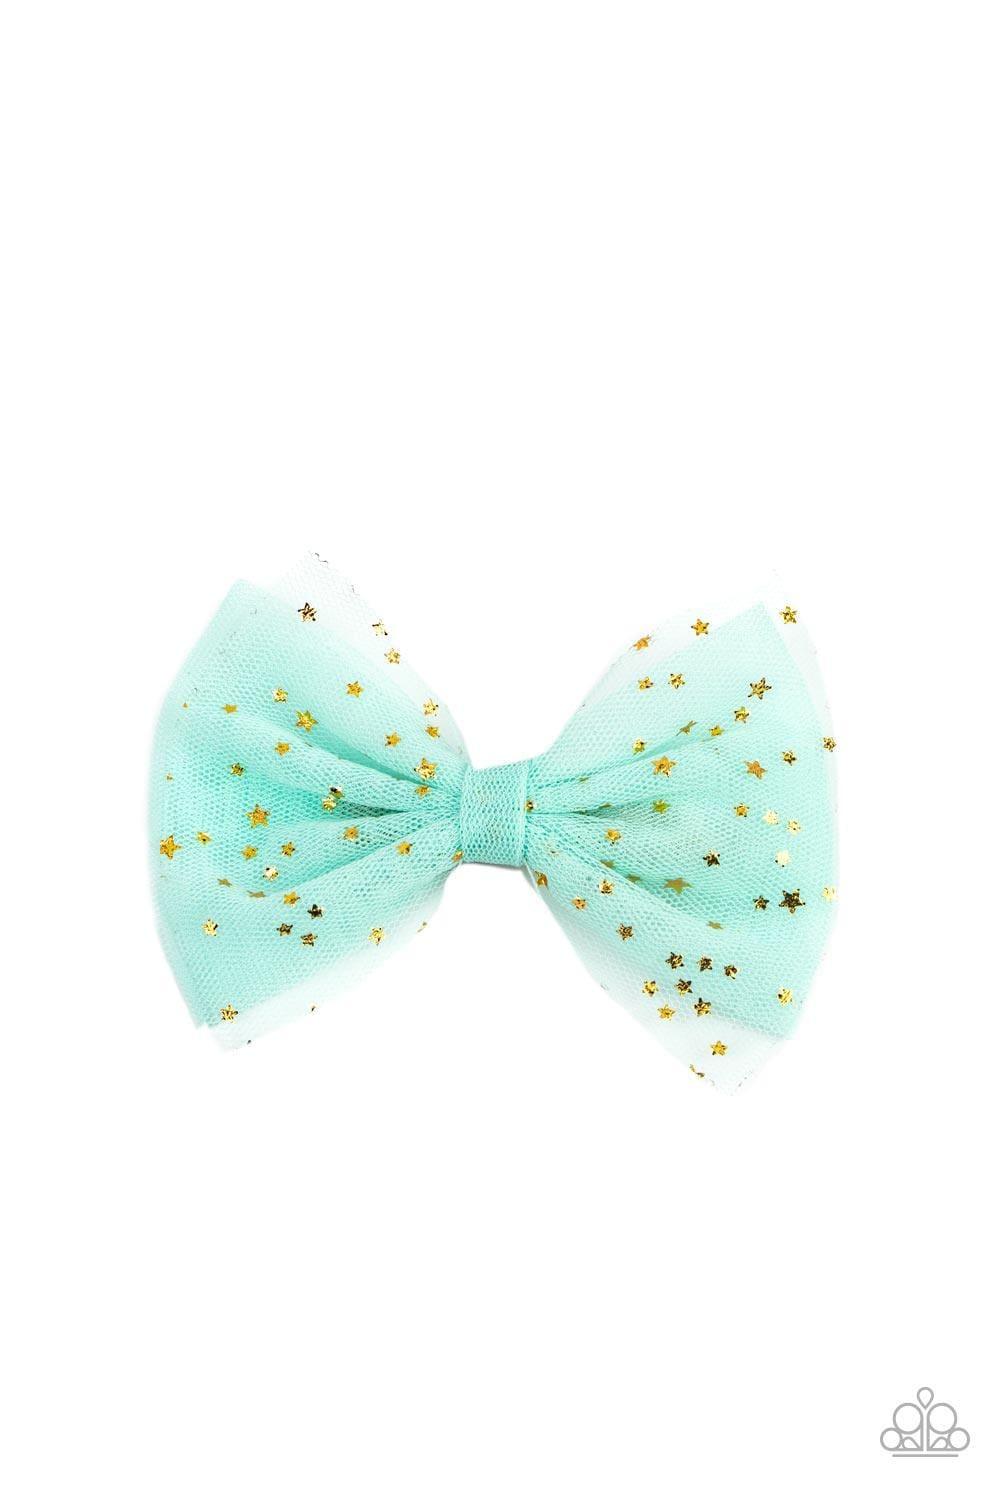 Paparazzi Accessories - Twinkly Tulle - Green Hair Bow - Bling by JessieK